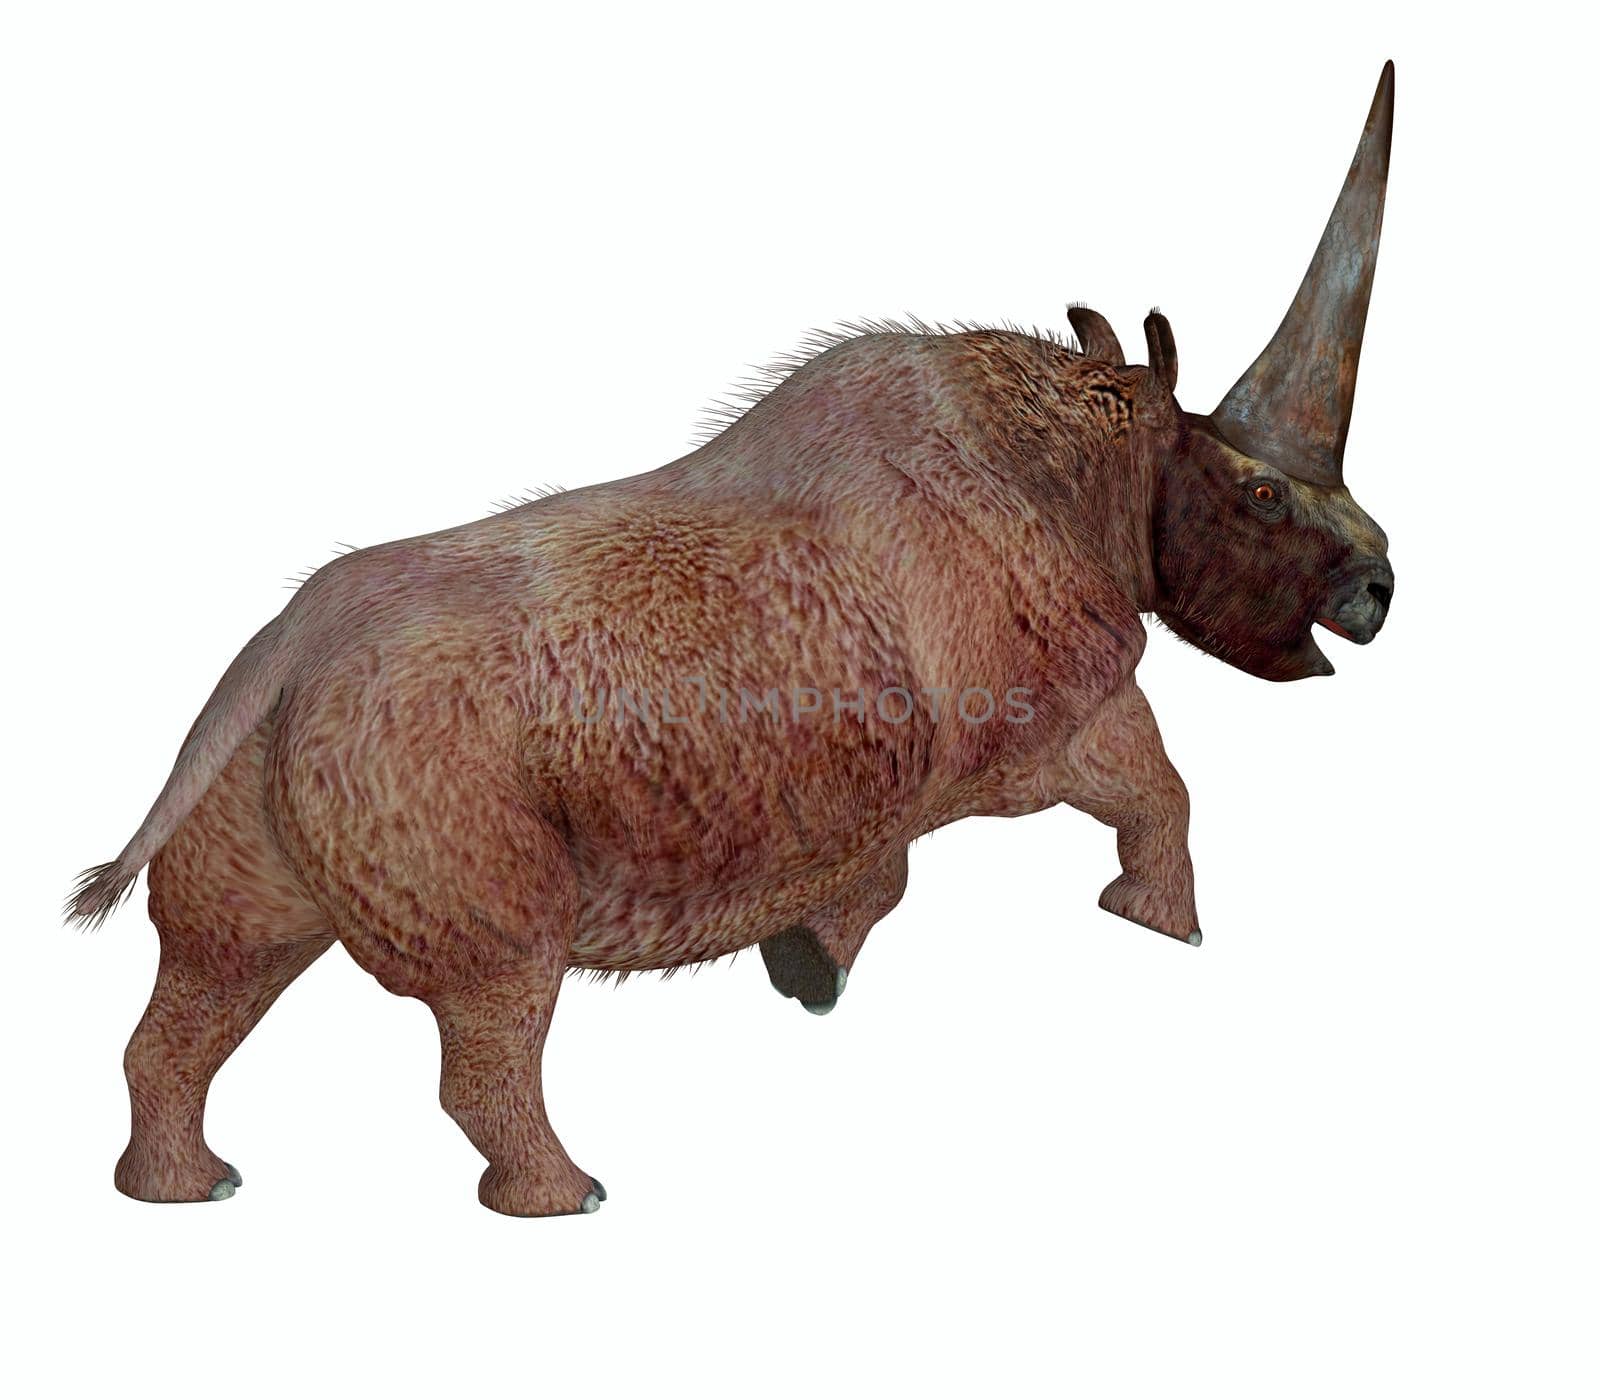 Elasmotherium was a herbivorous rhinoceros mammal that had a large horn on it's forehead and lived during the Pliocene and Pleistocene periods.